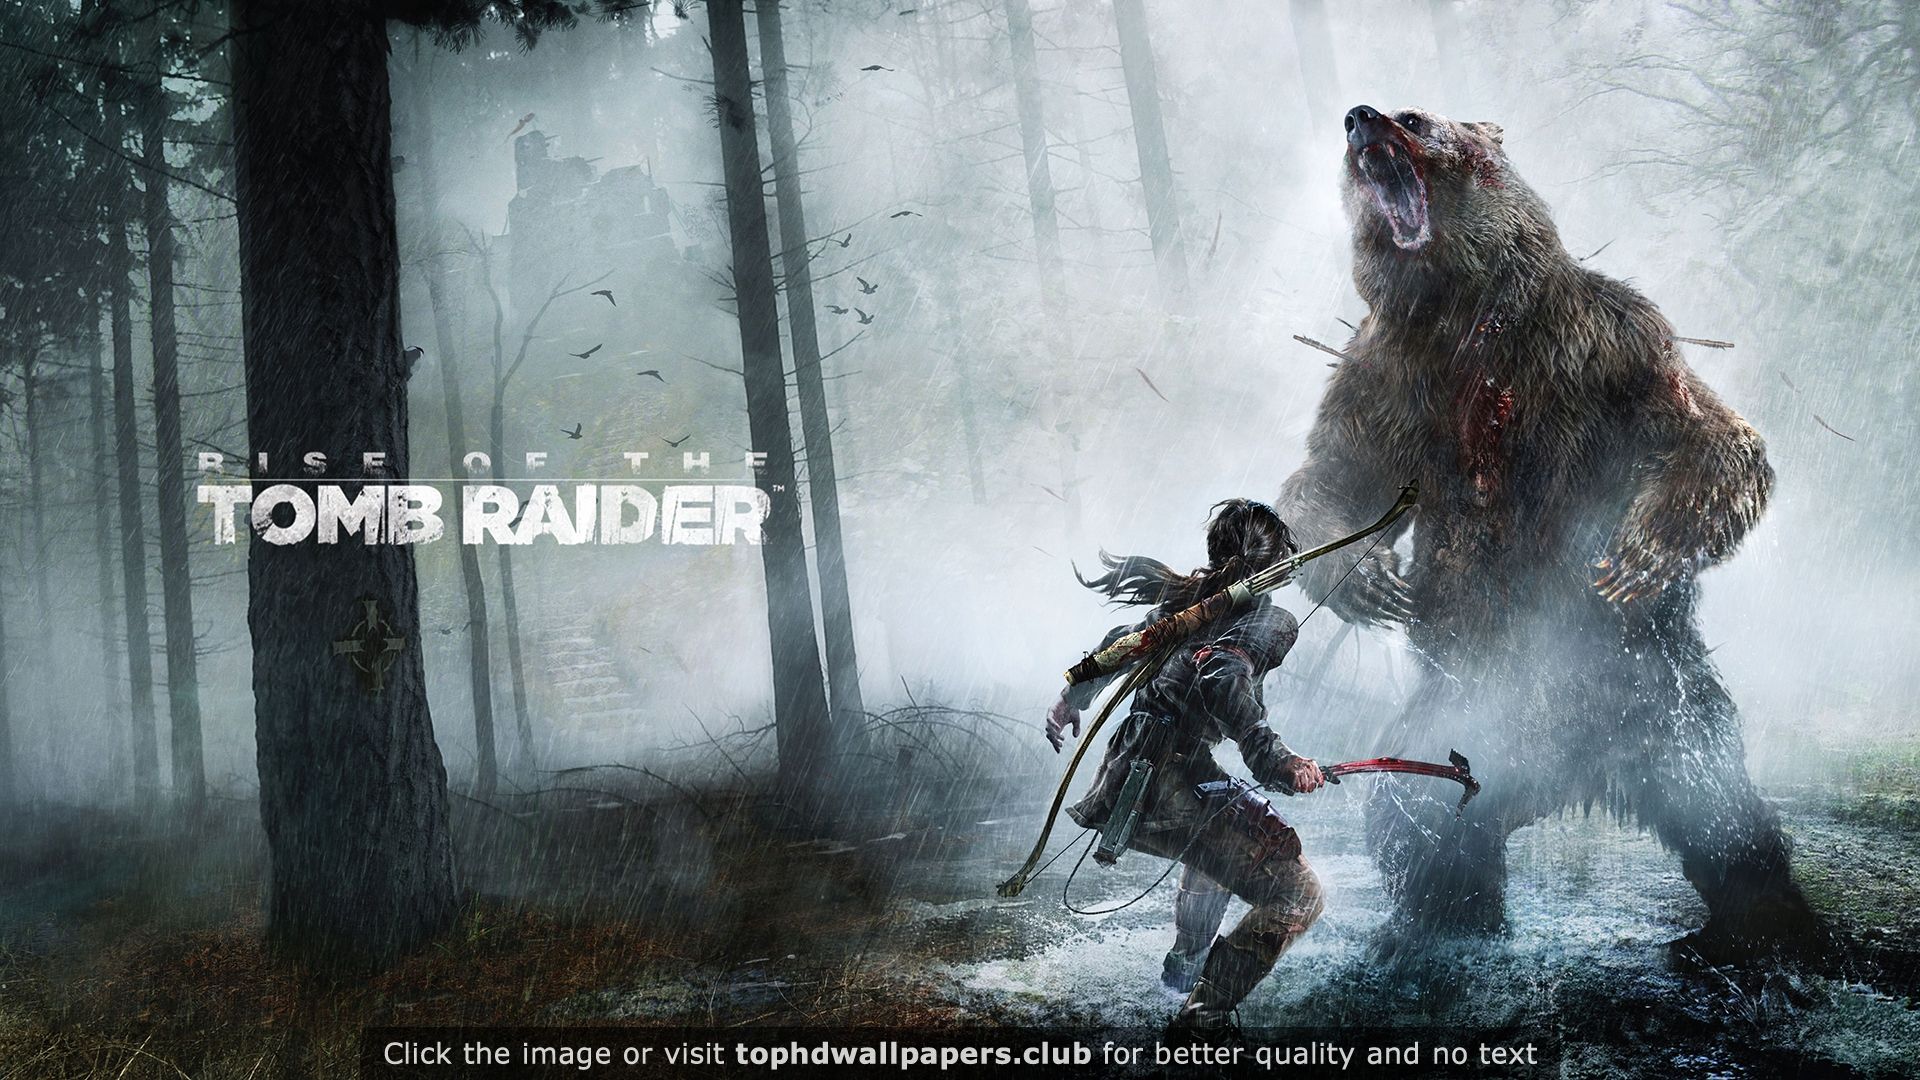 Rise of the tomb raider pc game hd wallpaper tomb raider wallpaper tomb raider tomb raider pc